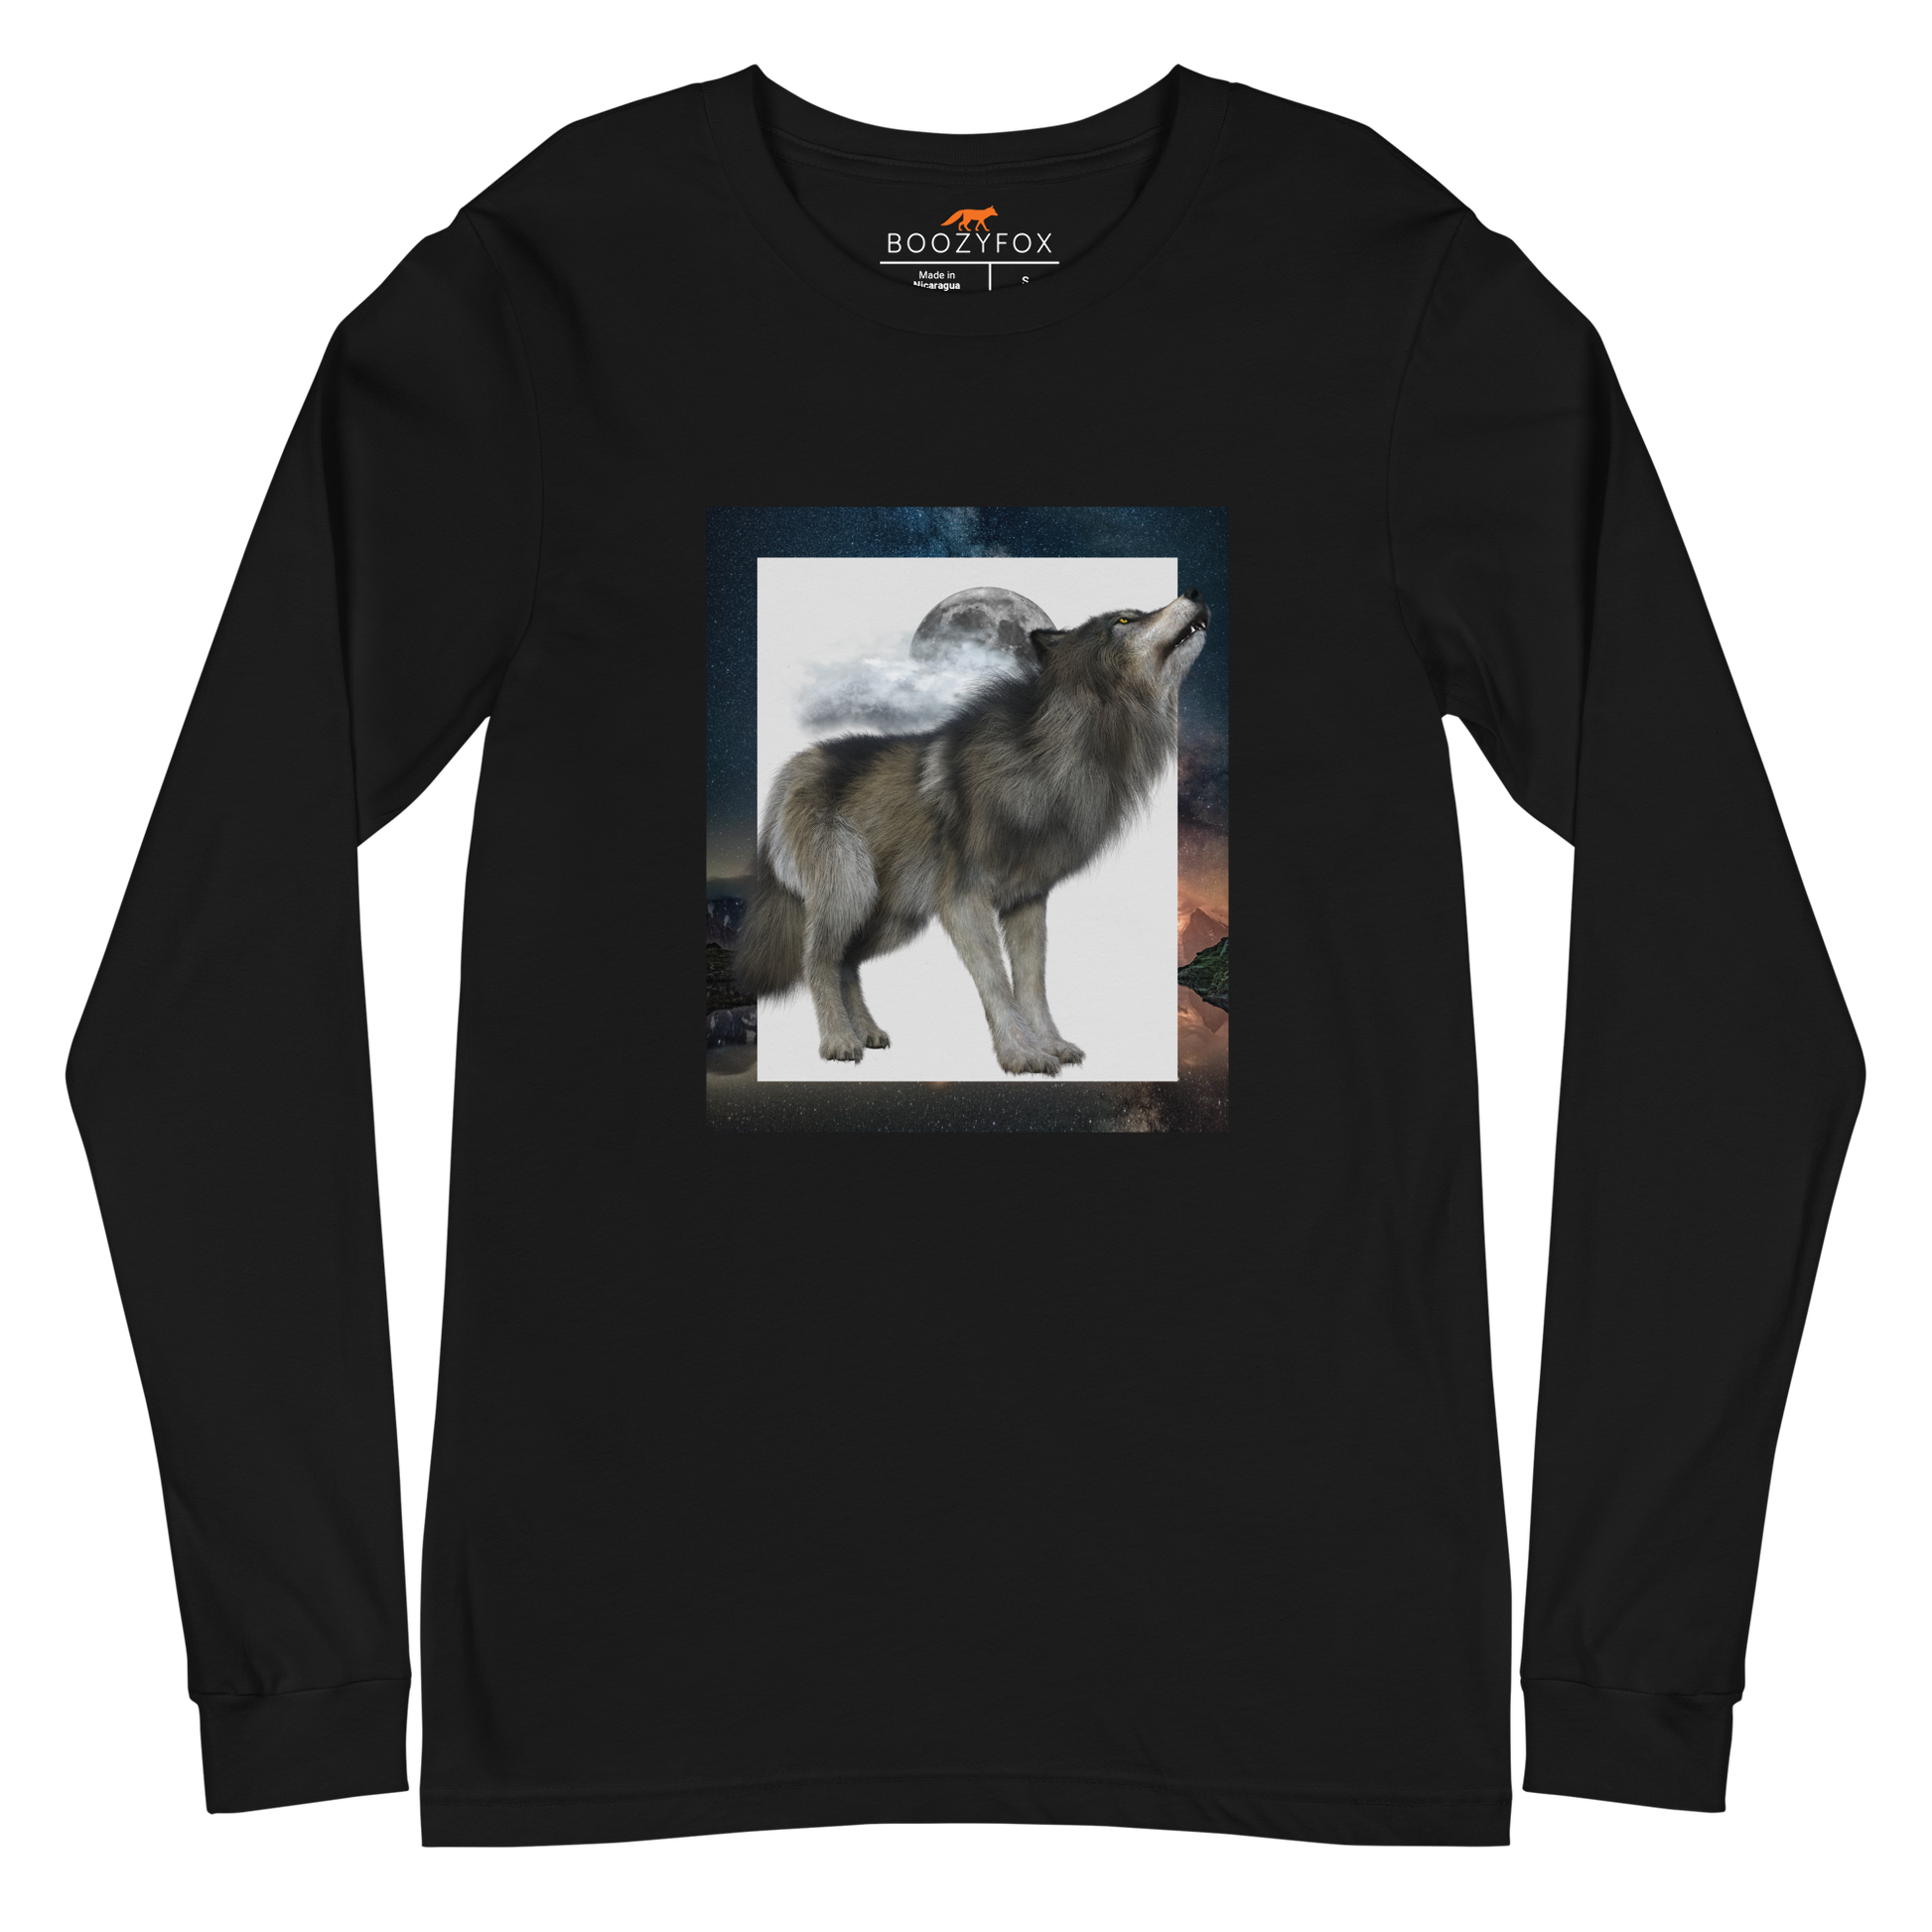 Black Wolf Long Sleeve Tee featuring a fierce Howling Wolf graphic on the chest - Cool Wolf Long Sleeve Graphic Tees - Boozy Fox